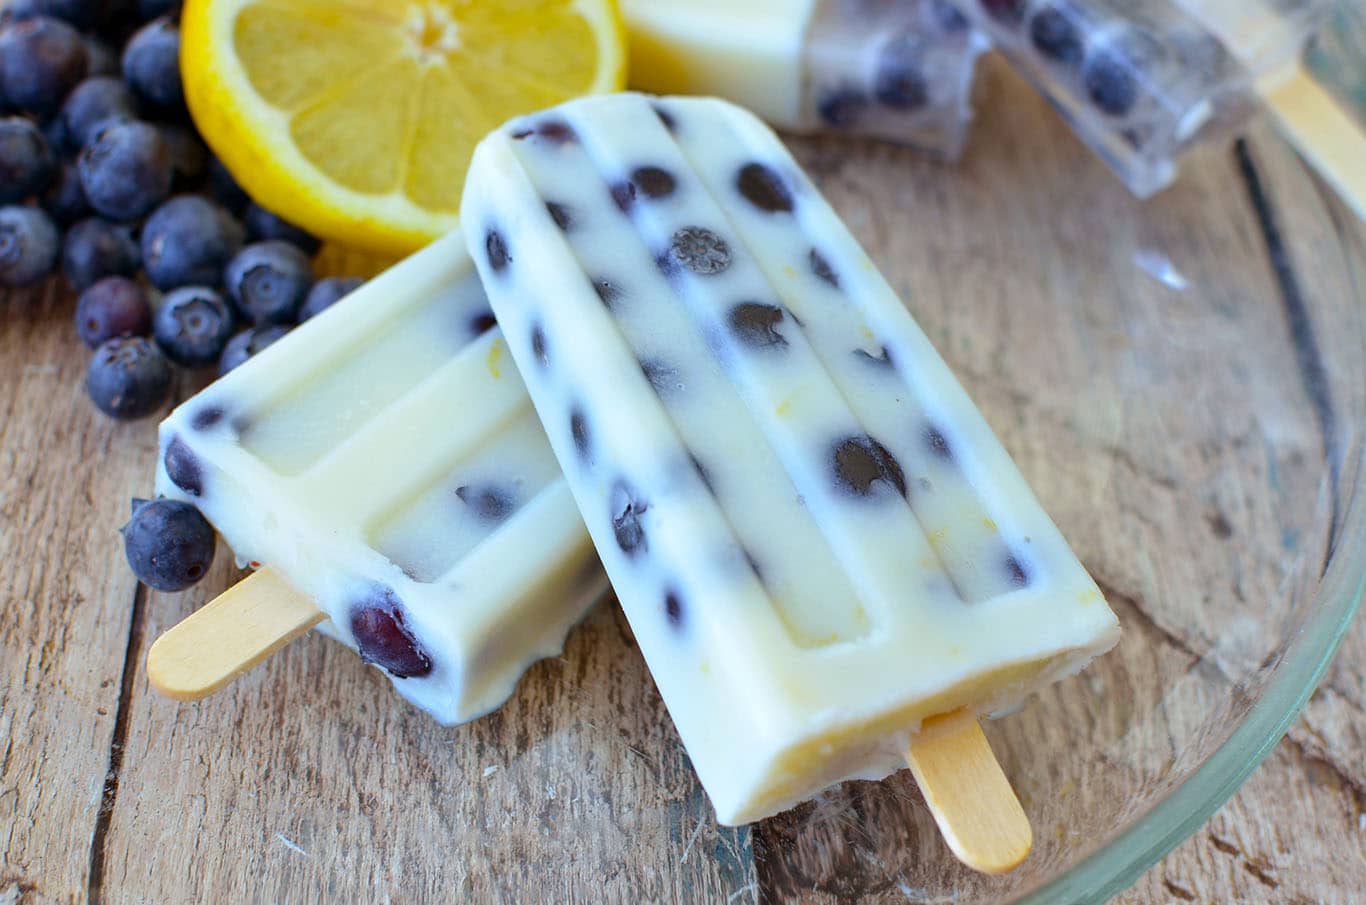 Blueberry Lemon Pudding pops on a plate with blueberries and lemons